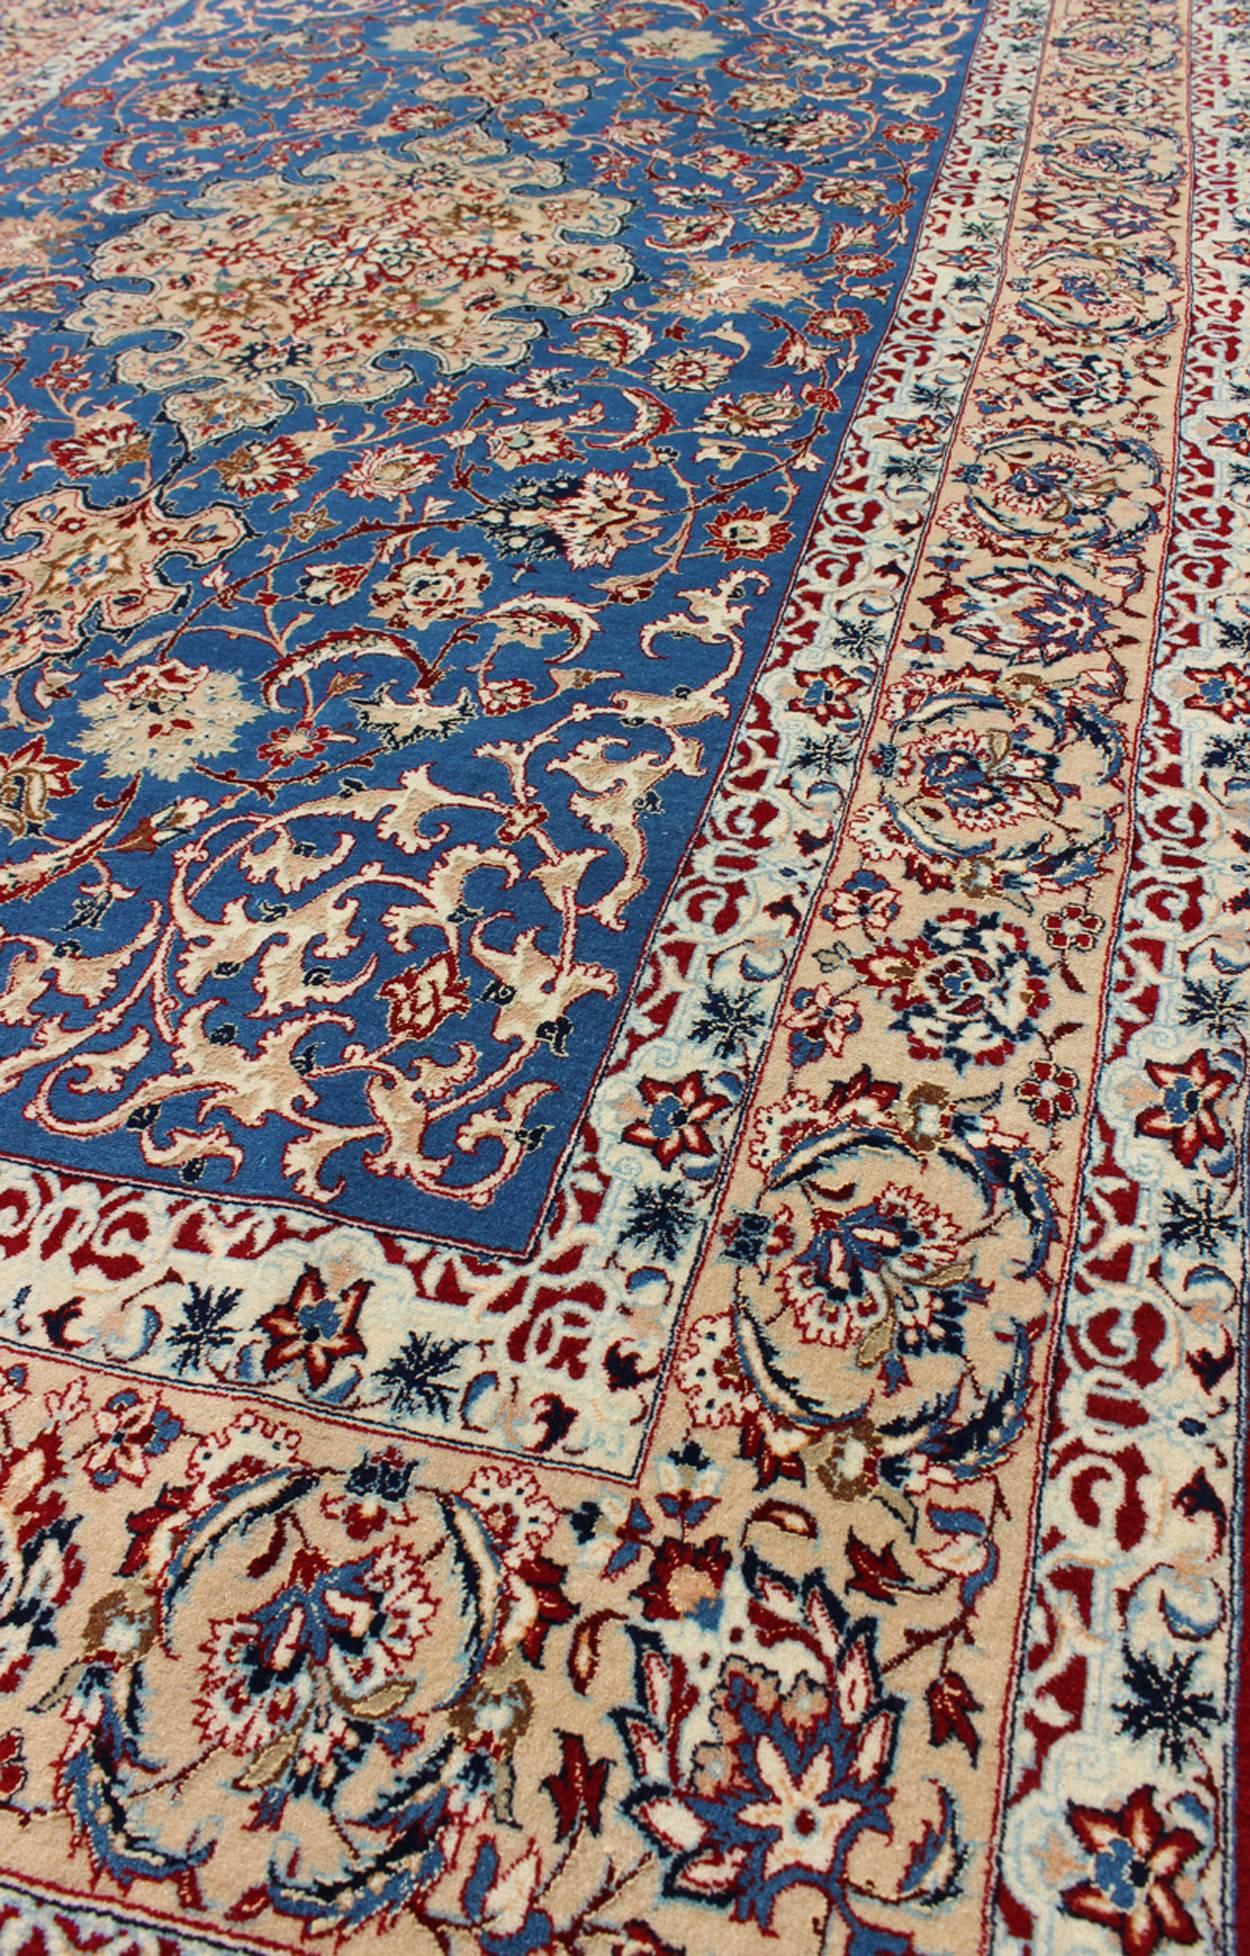 Very Fine Silk & Wool Isfahan Rug with Intricate Florals in Blue Persian  In Excellent Condition For Sale In Atlanta, GA